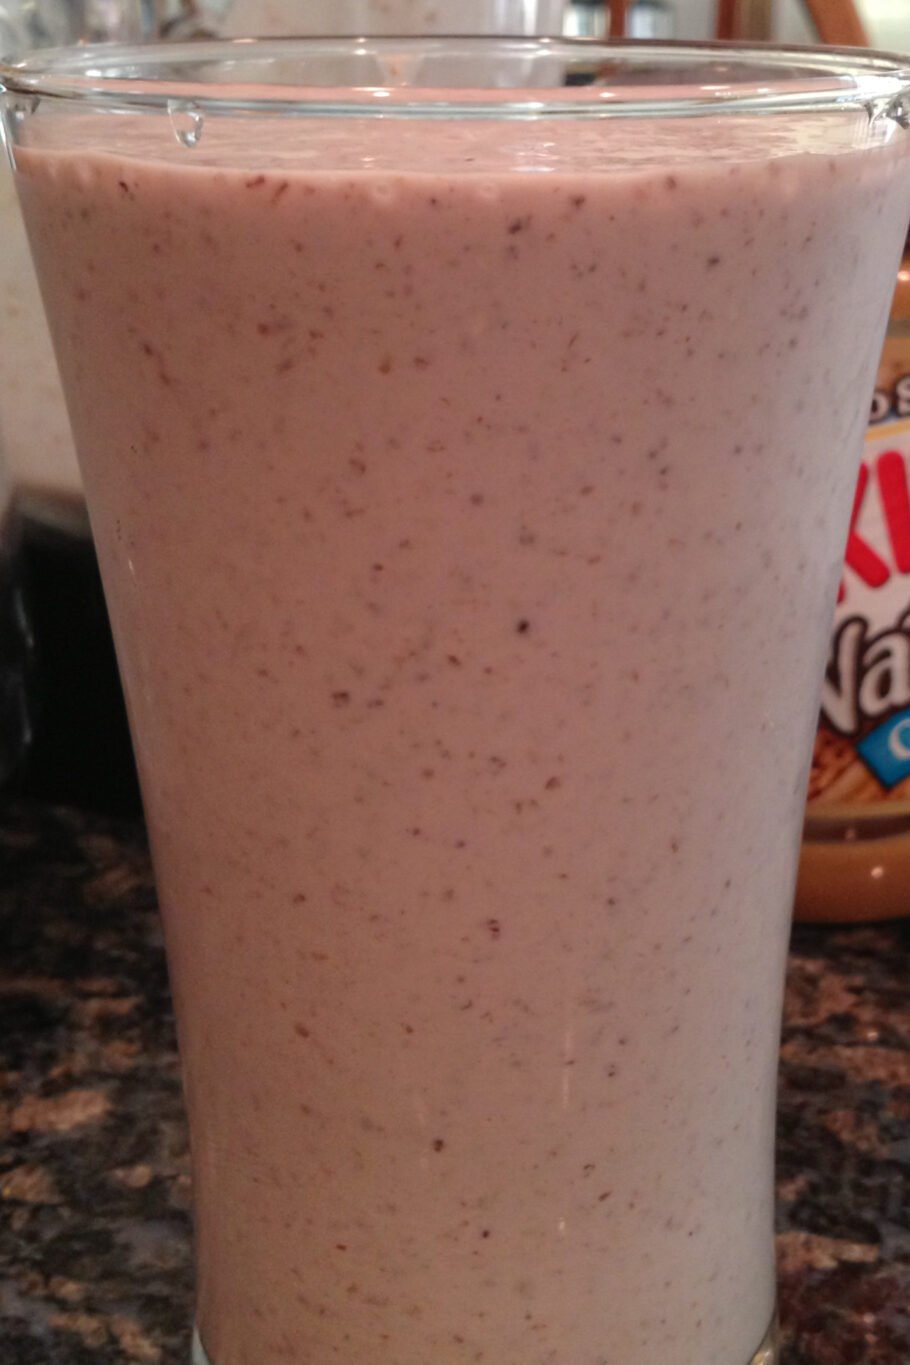 https://media.theproteinchef.co/wp-content/uploads/2021/07/Peanut-Butter-Jelly-Protein-Shake-Glass-910x1365.jpg